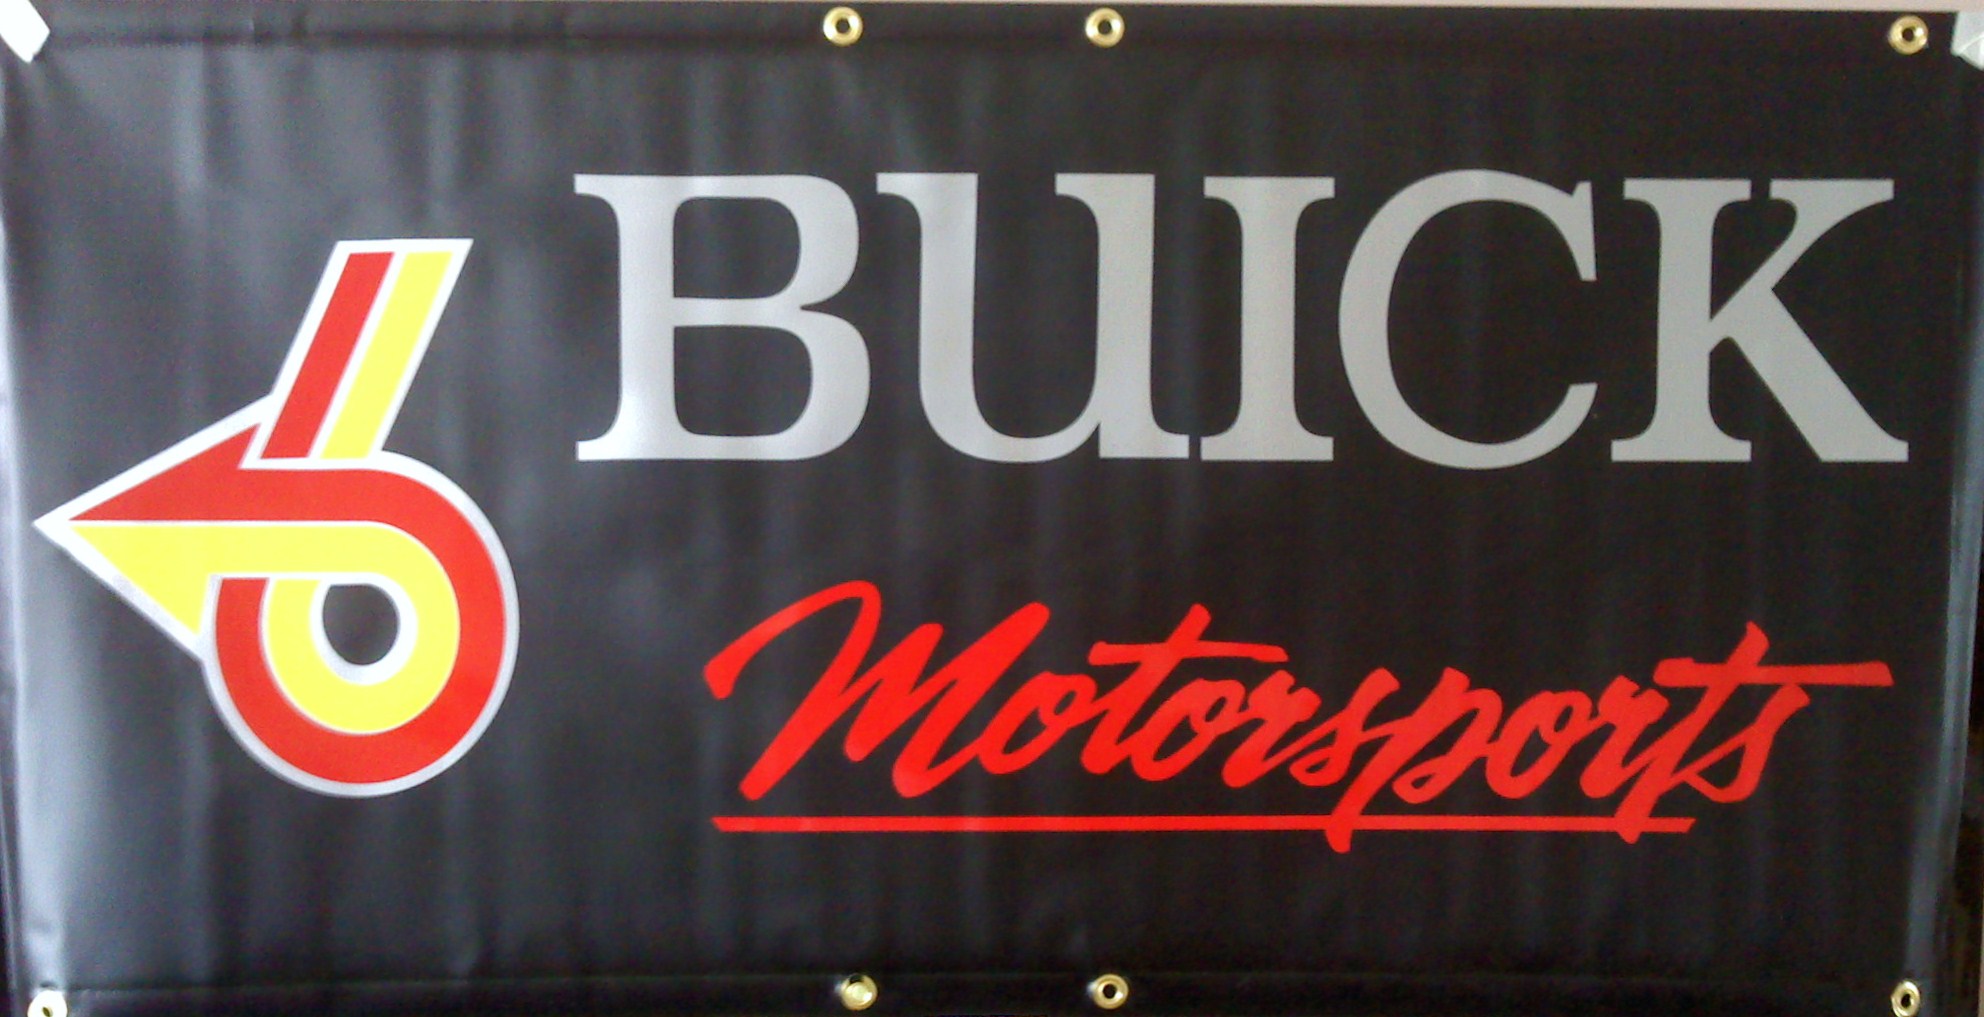 Buick Power6 Motorsports premium 13 oz vinyl banner black with red, yellow and silver lettering 4 FT x 2 FT